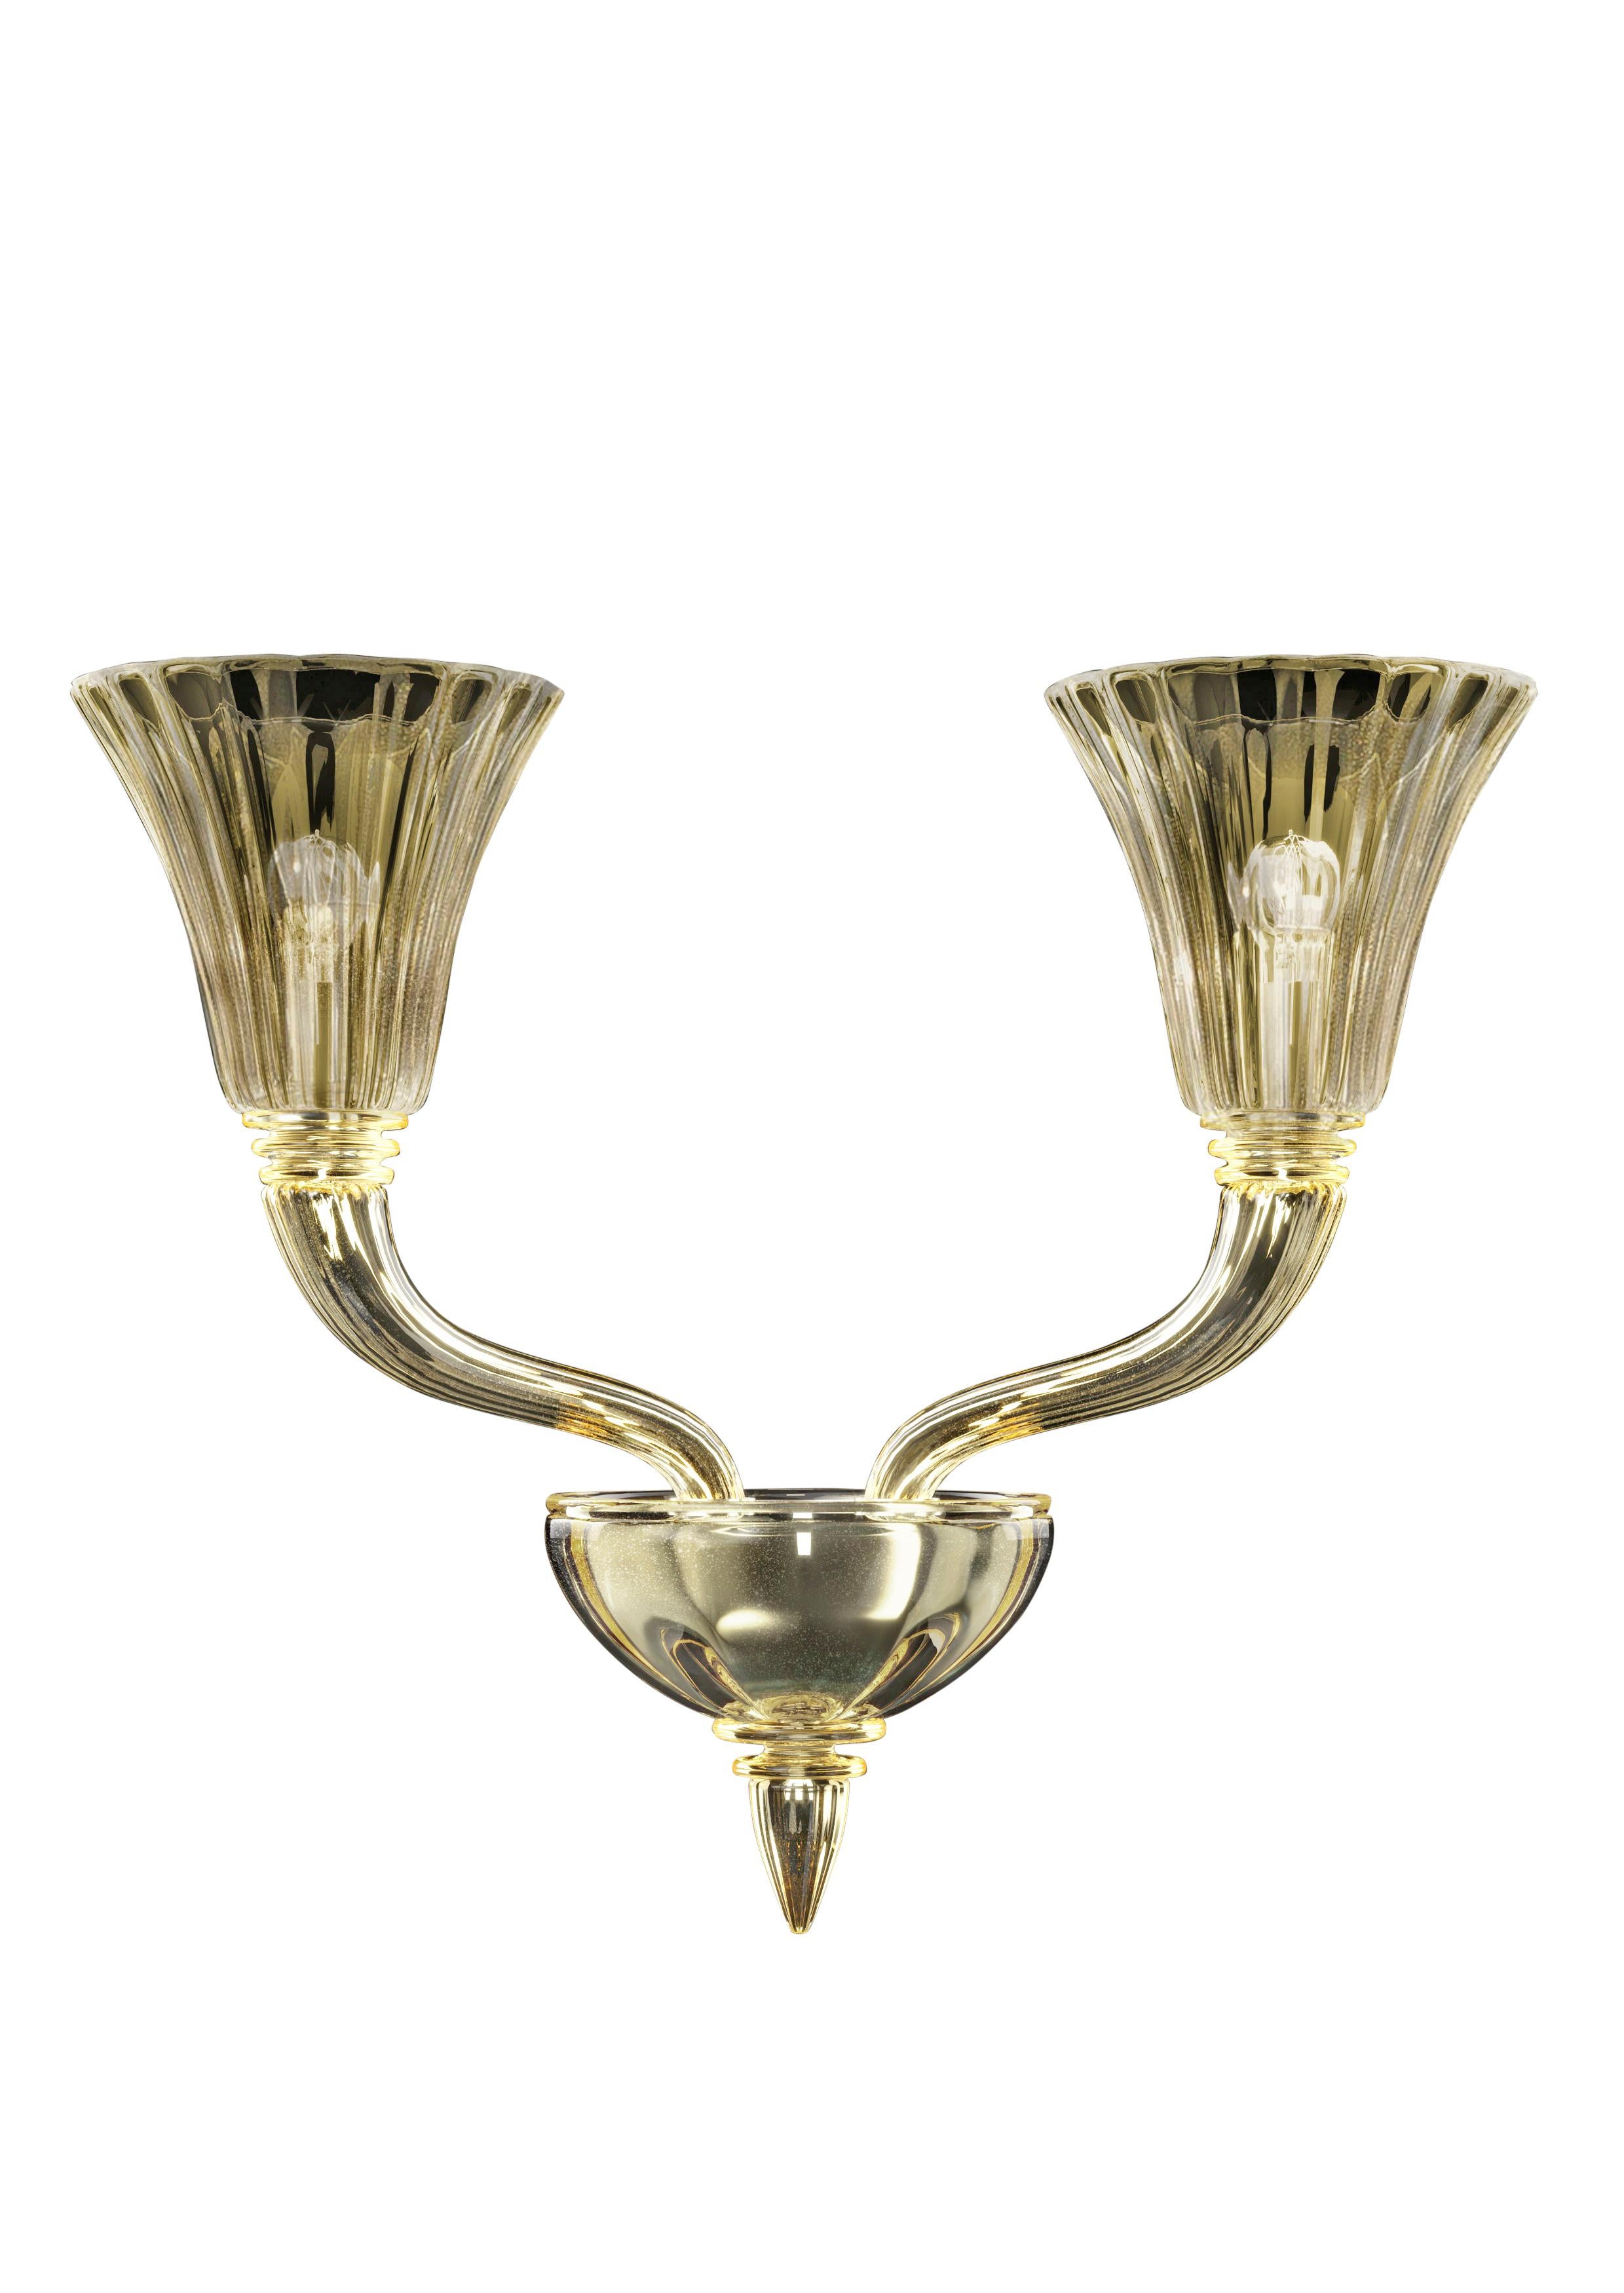 Degas 5554 02 Wall Sconce in Glass, by Barovier&Toso